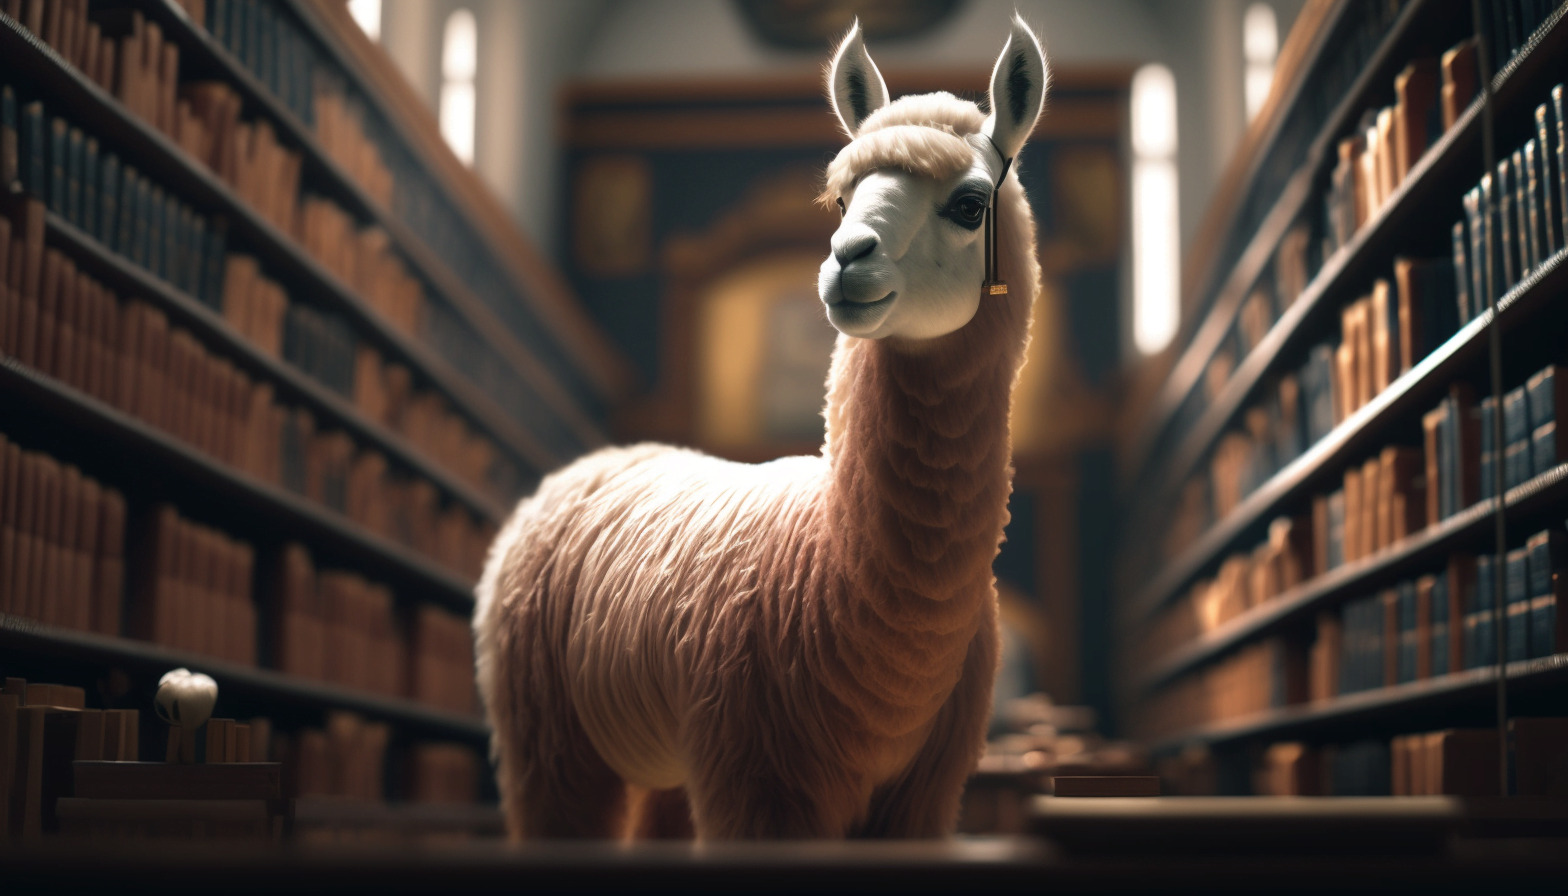 A Llama in the Library